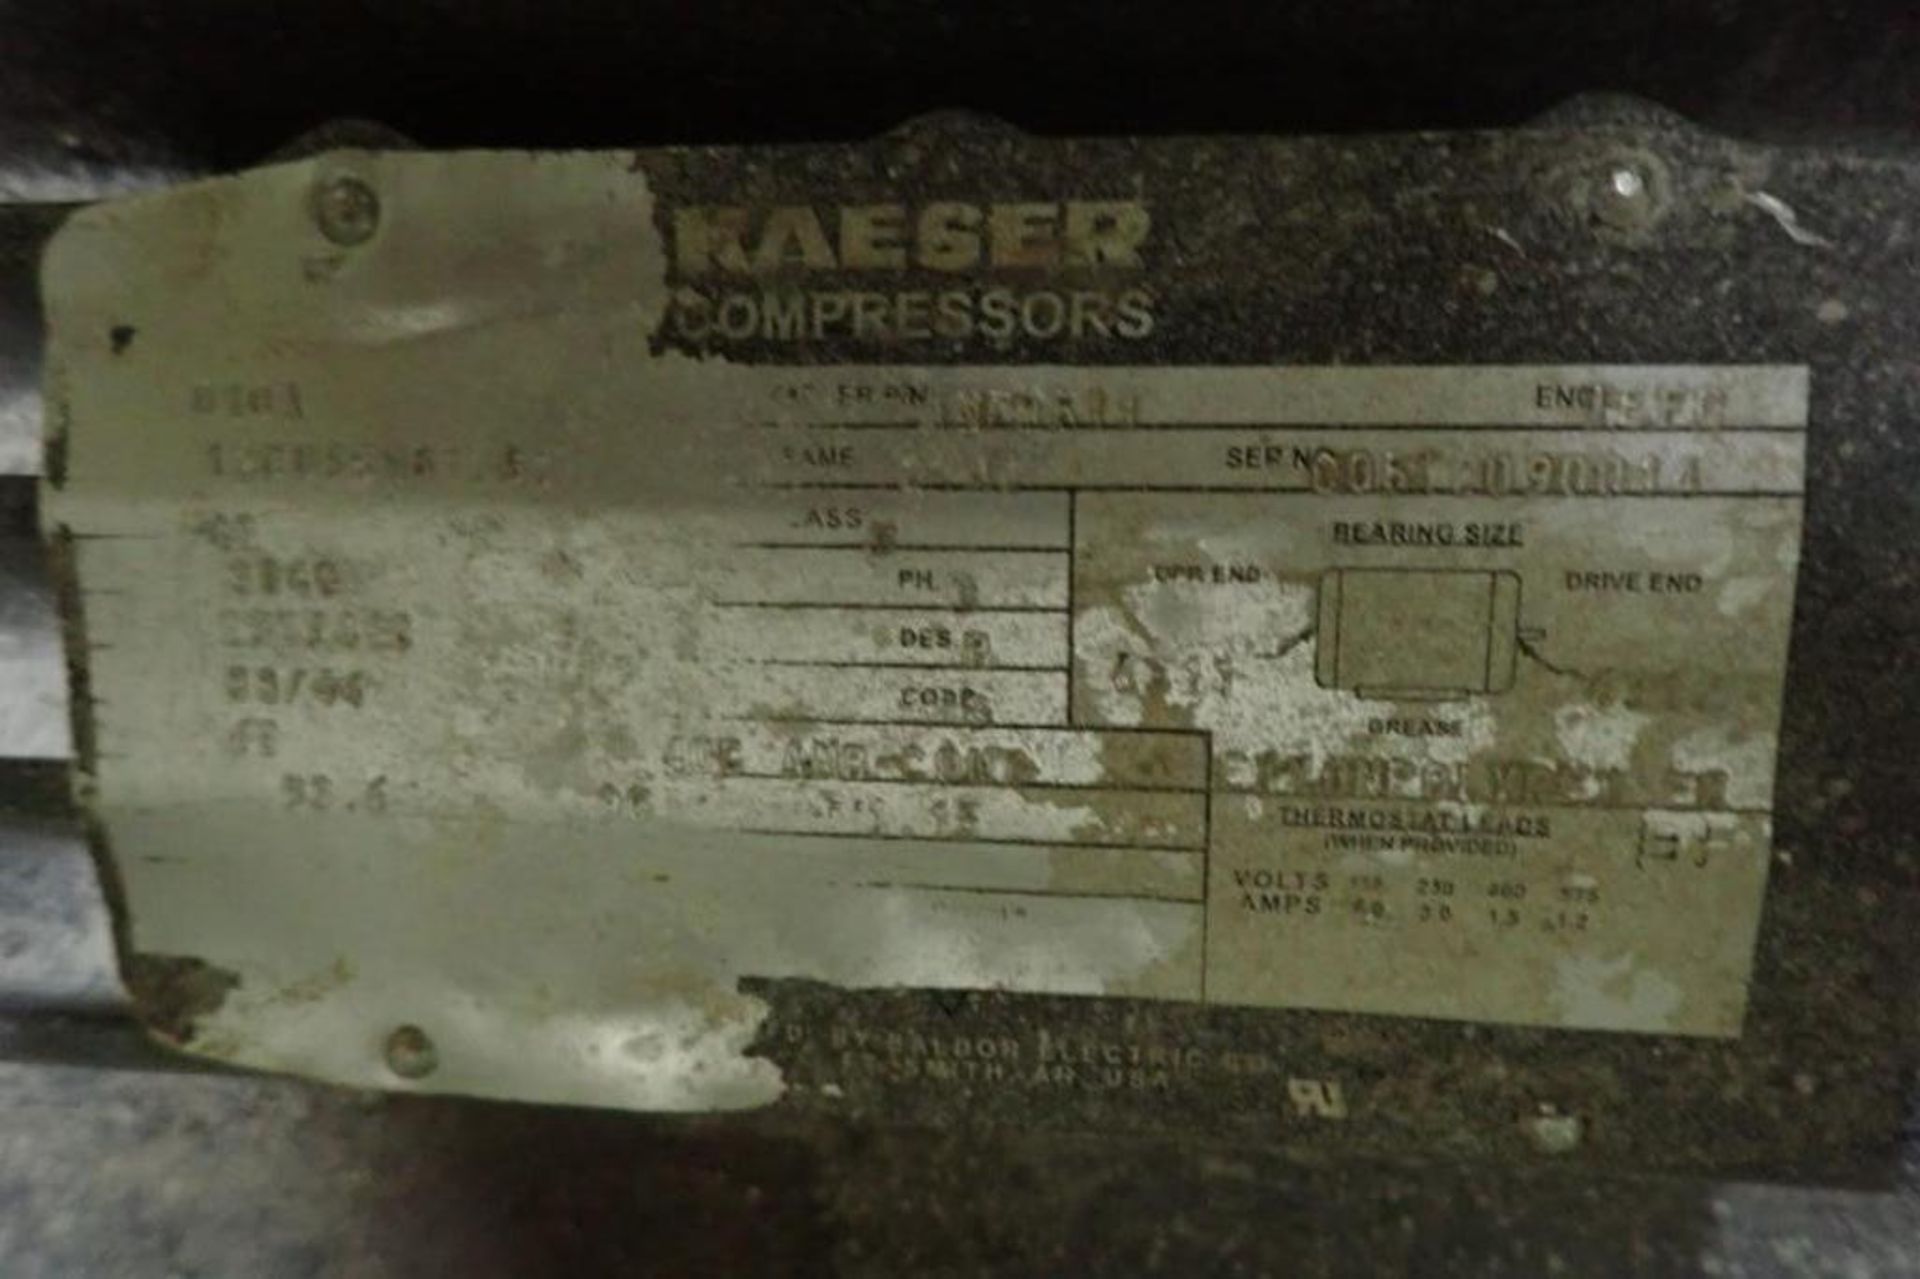 2005 Kaeser Omega 43 plus rotary blower, SN 1656 BJ 2005. **Rigging Fee: $200** (Located in Brooklyn - Image 6 of 7